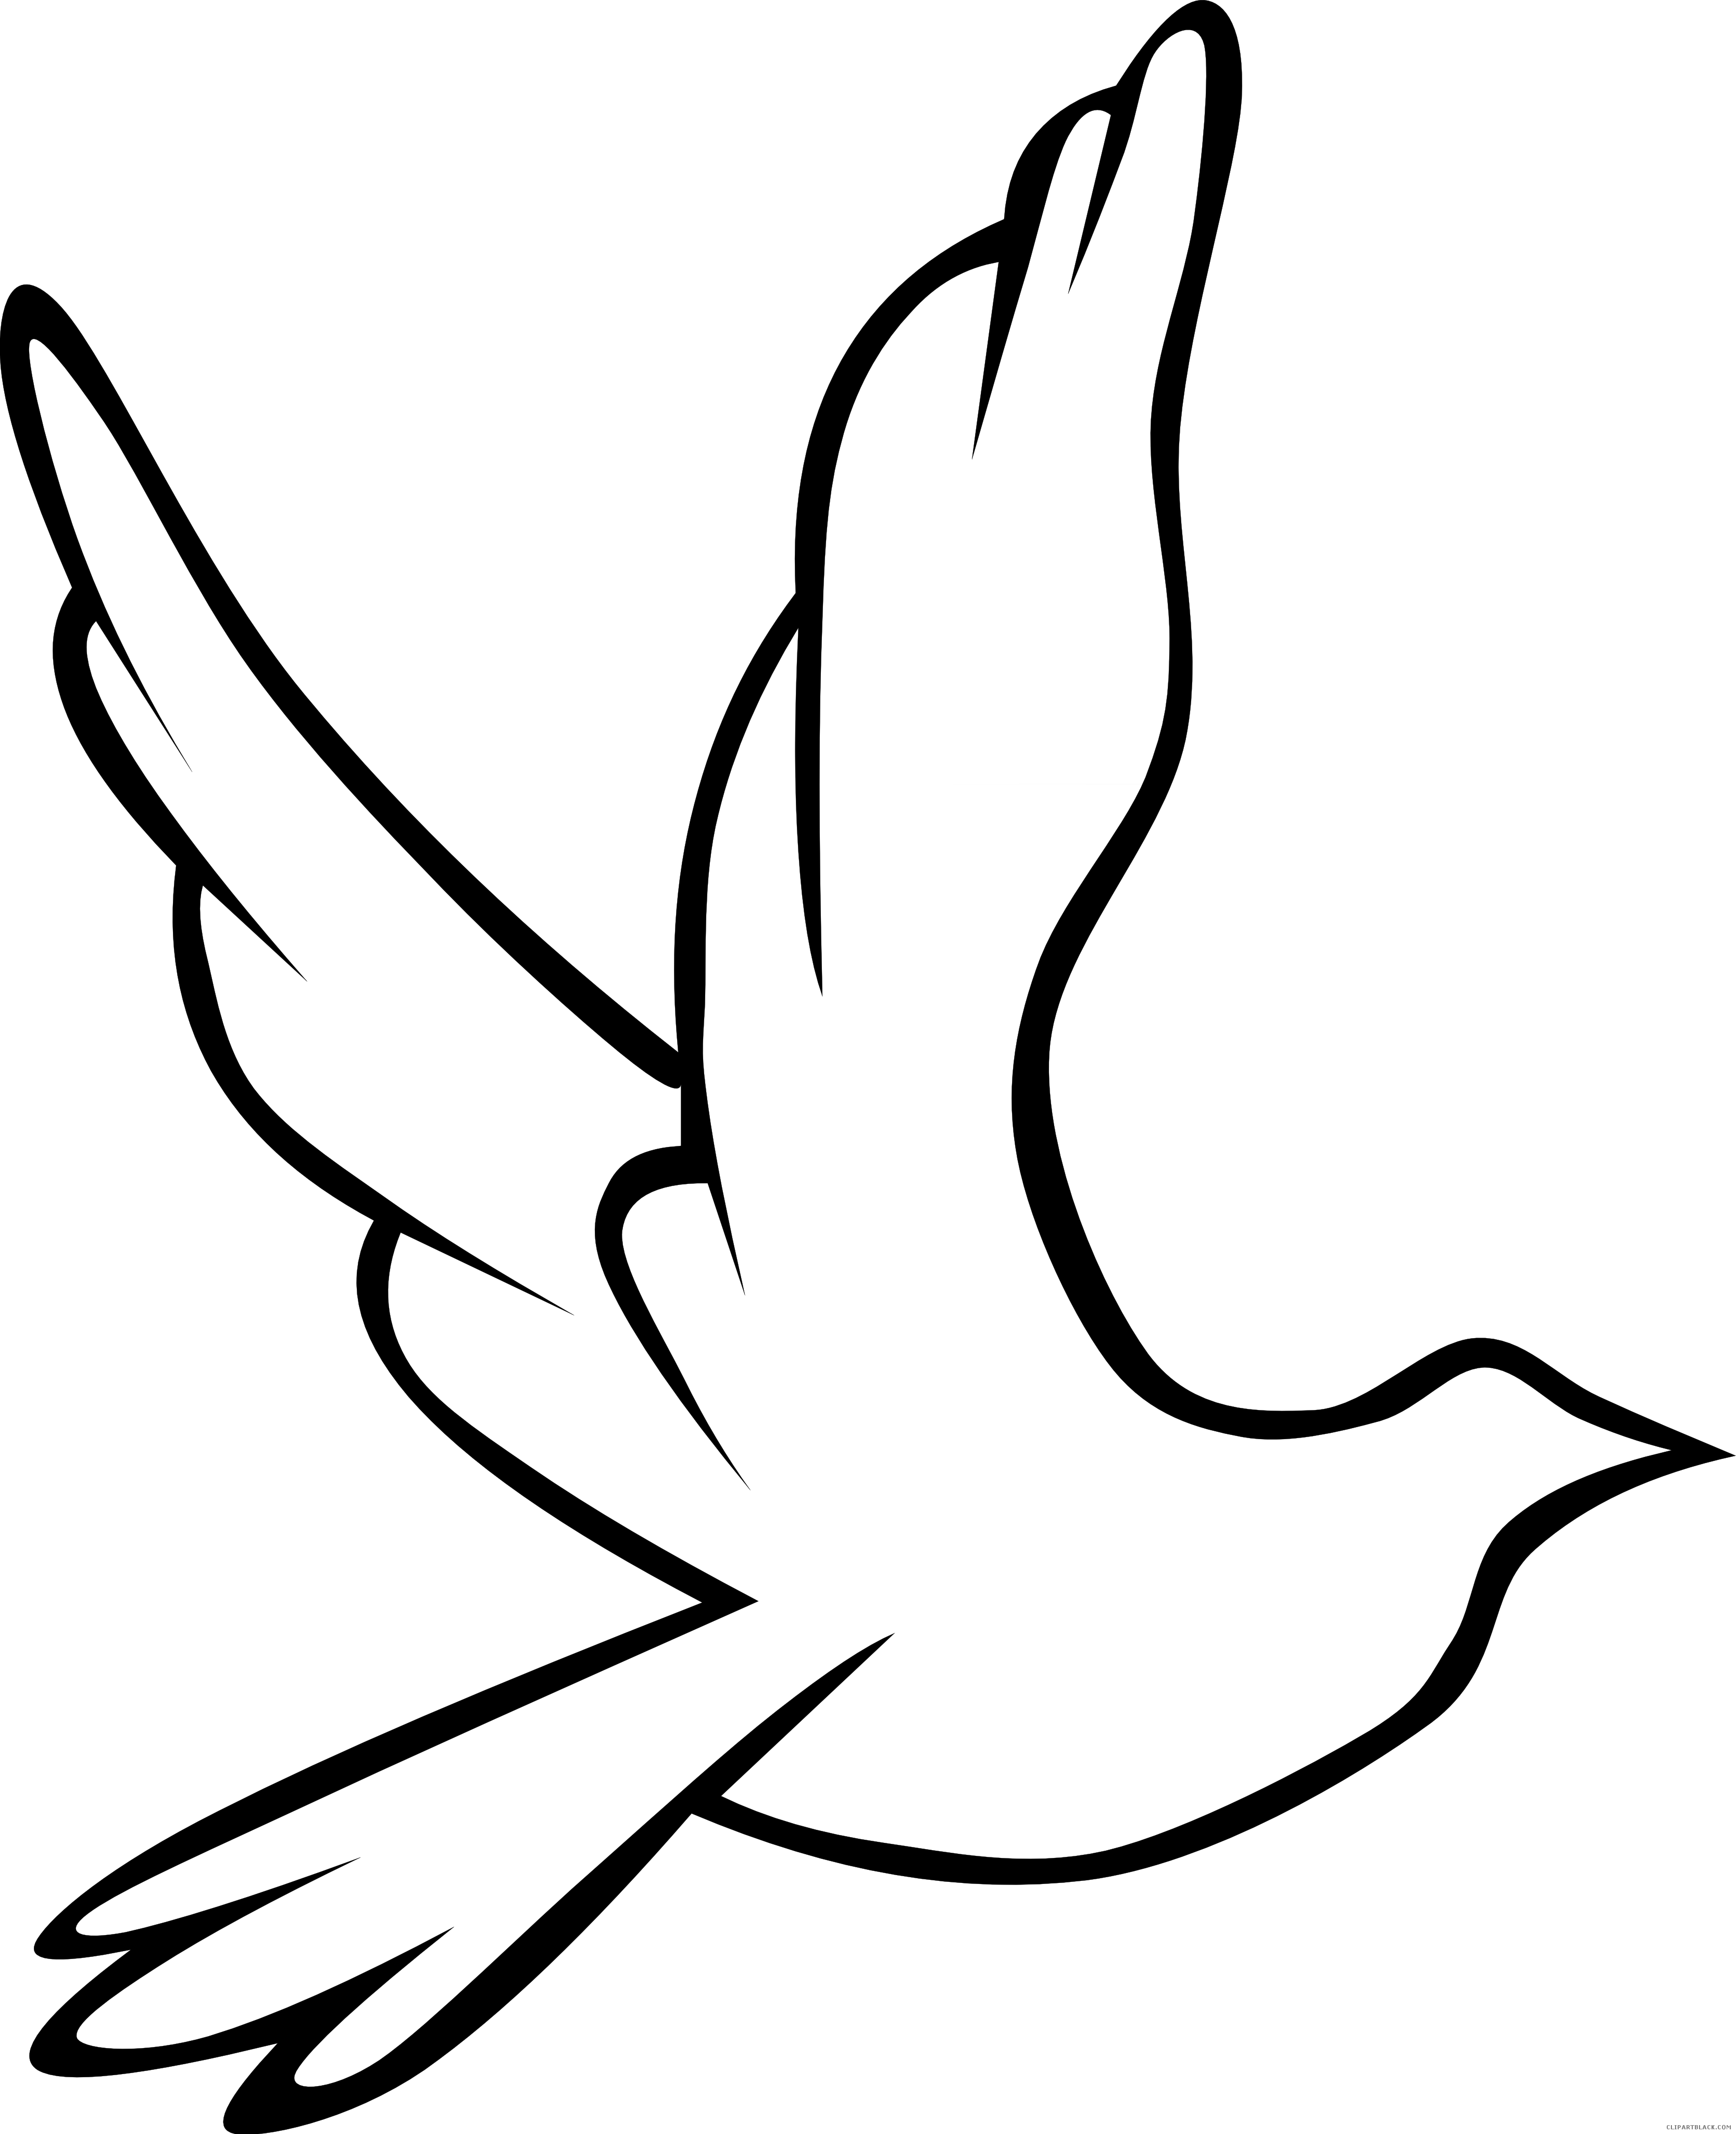 Doves clipart funeral. Dove page of clipartblack